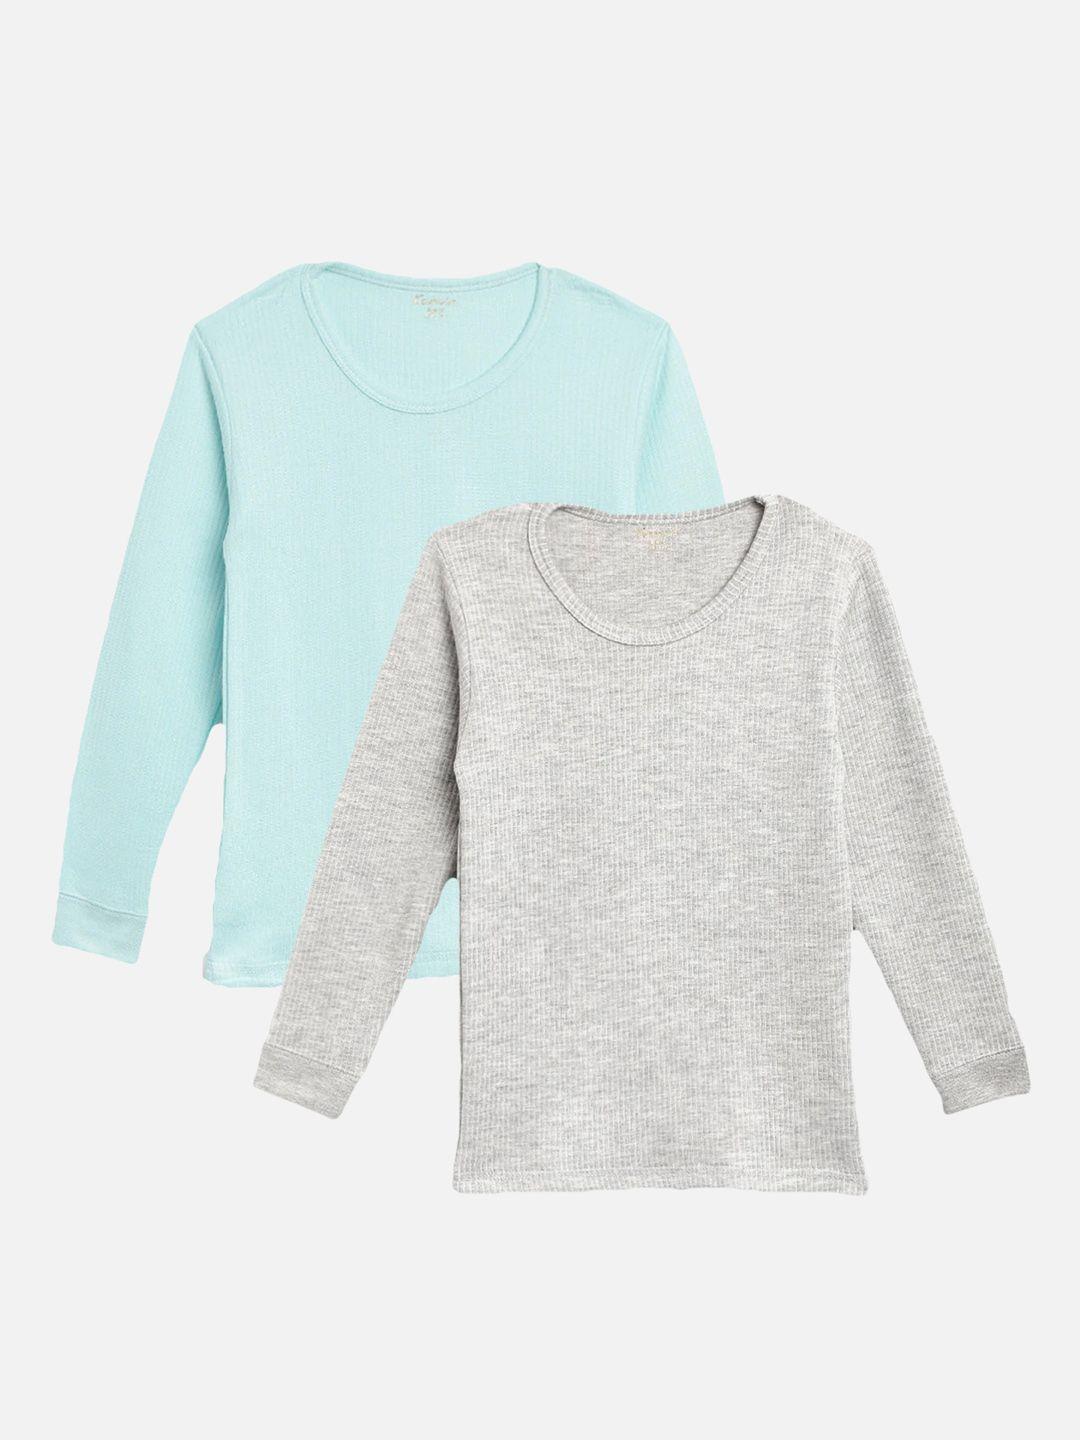 kanvin boys pack of 2 grey melange & turquoise blue ribbed cotton thermal tops